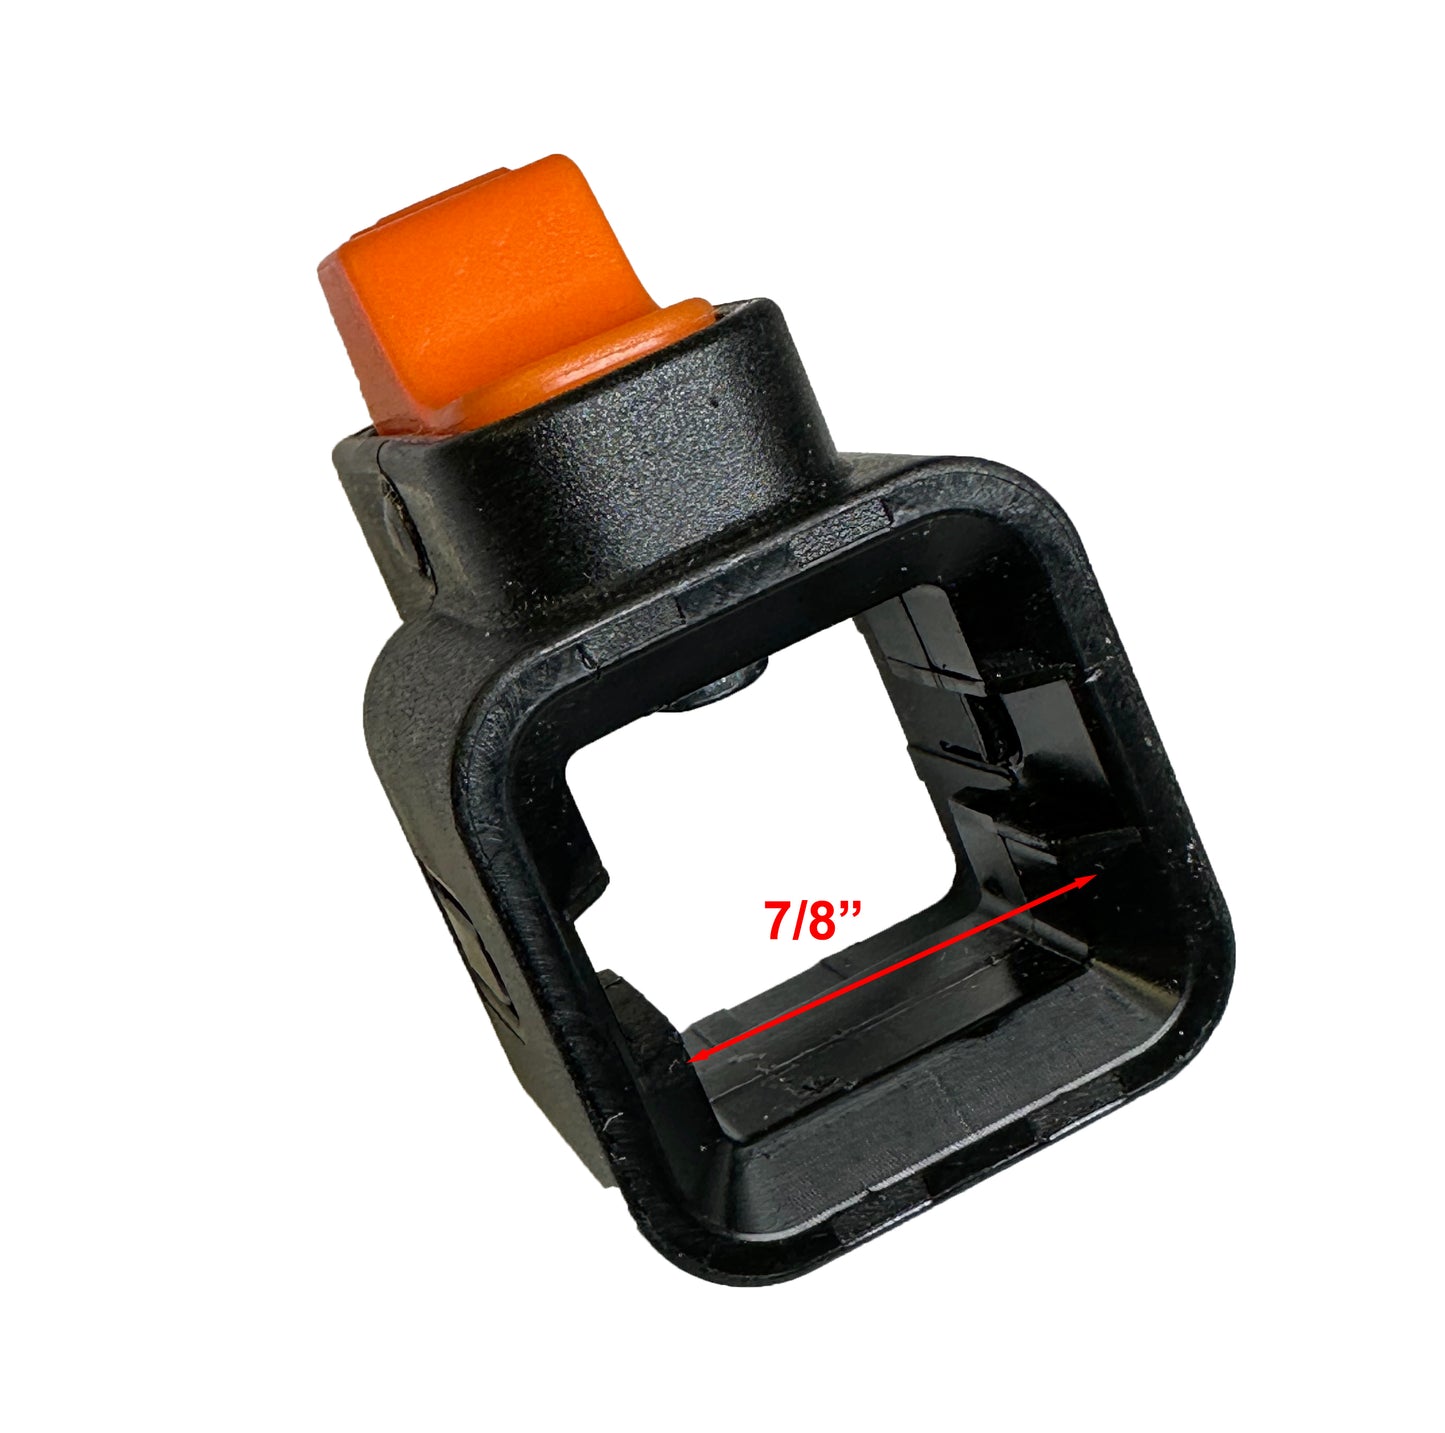 Top-down view of a black leg lower slider with an orange release button for an Ozark Trail canopy, with the interior height dimension marked as 7/8 inch.